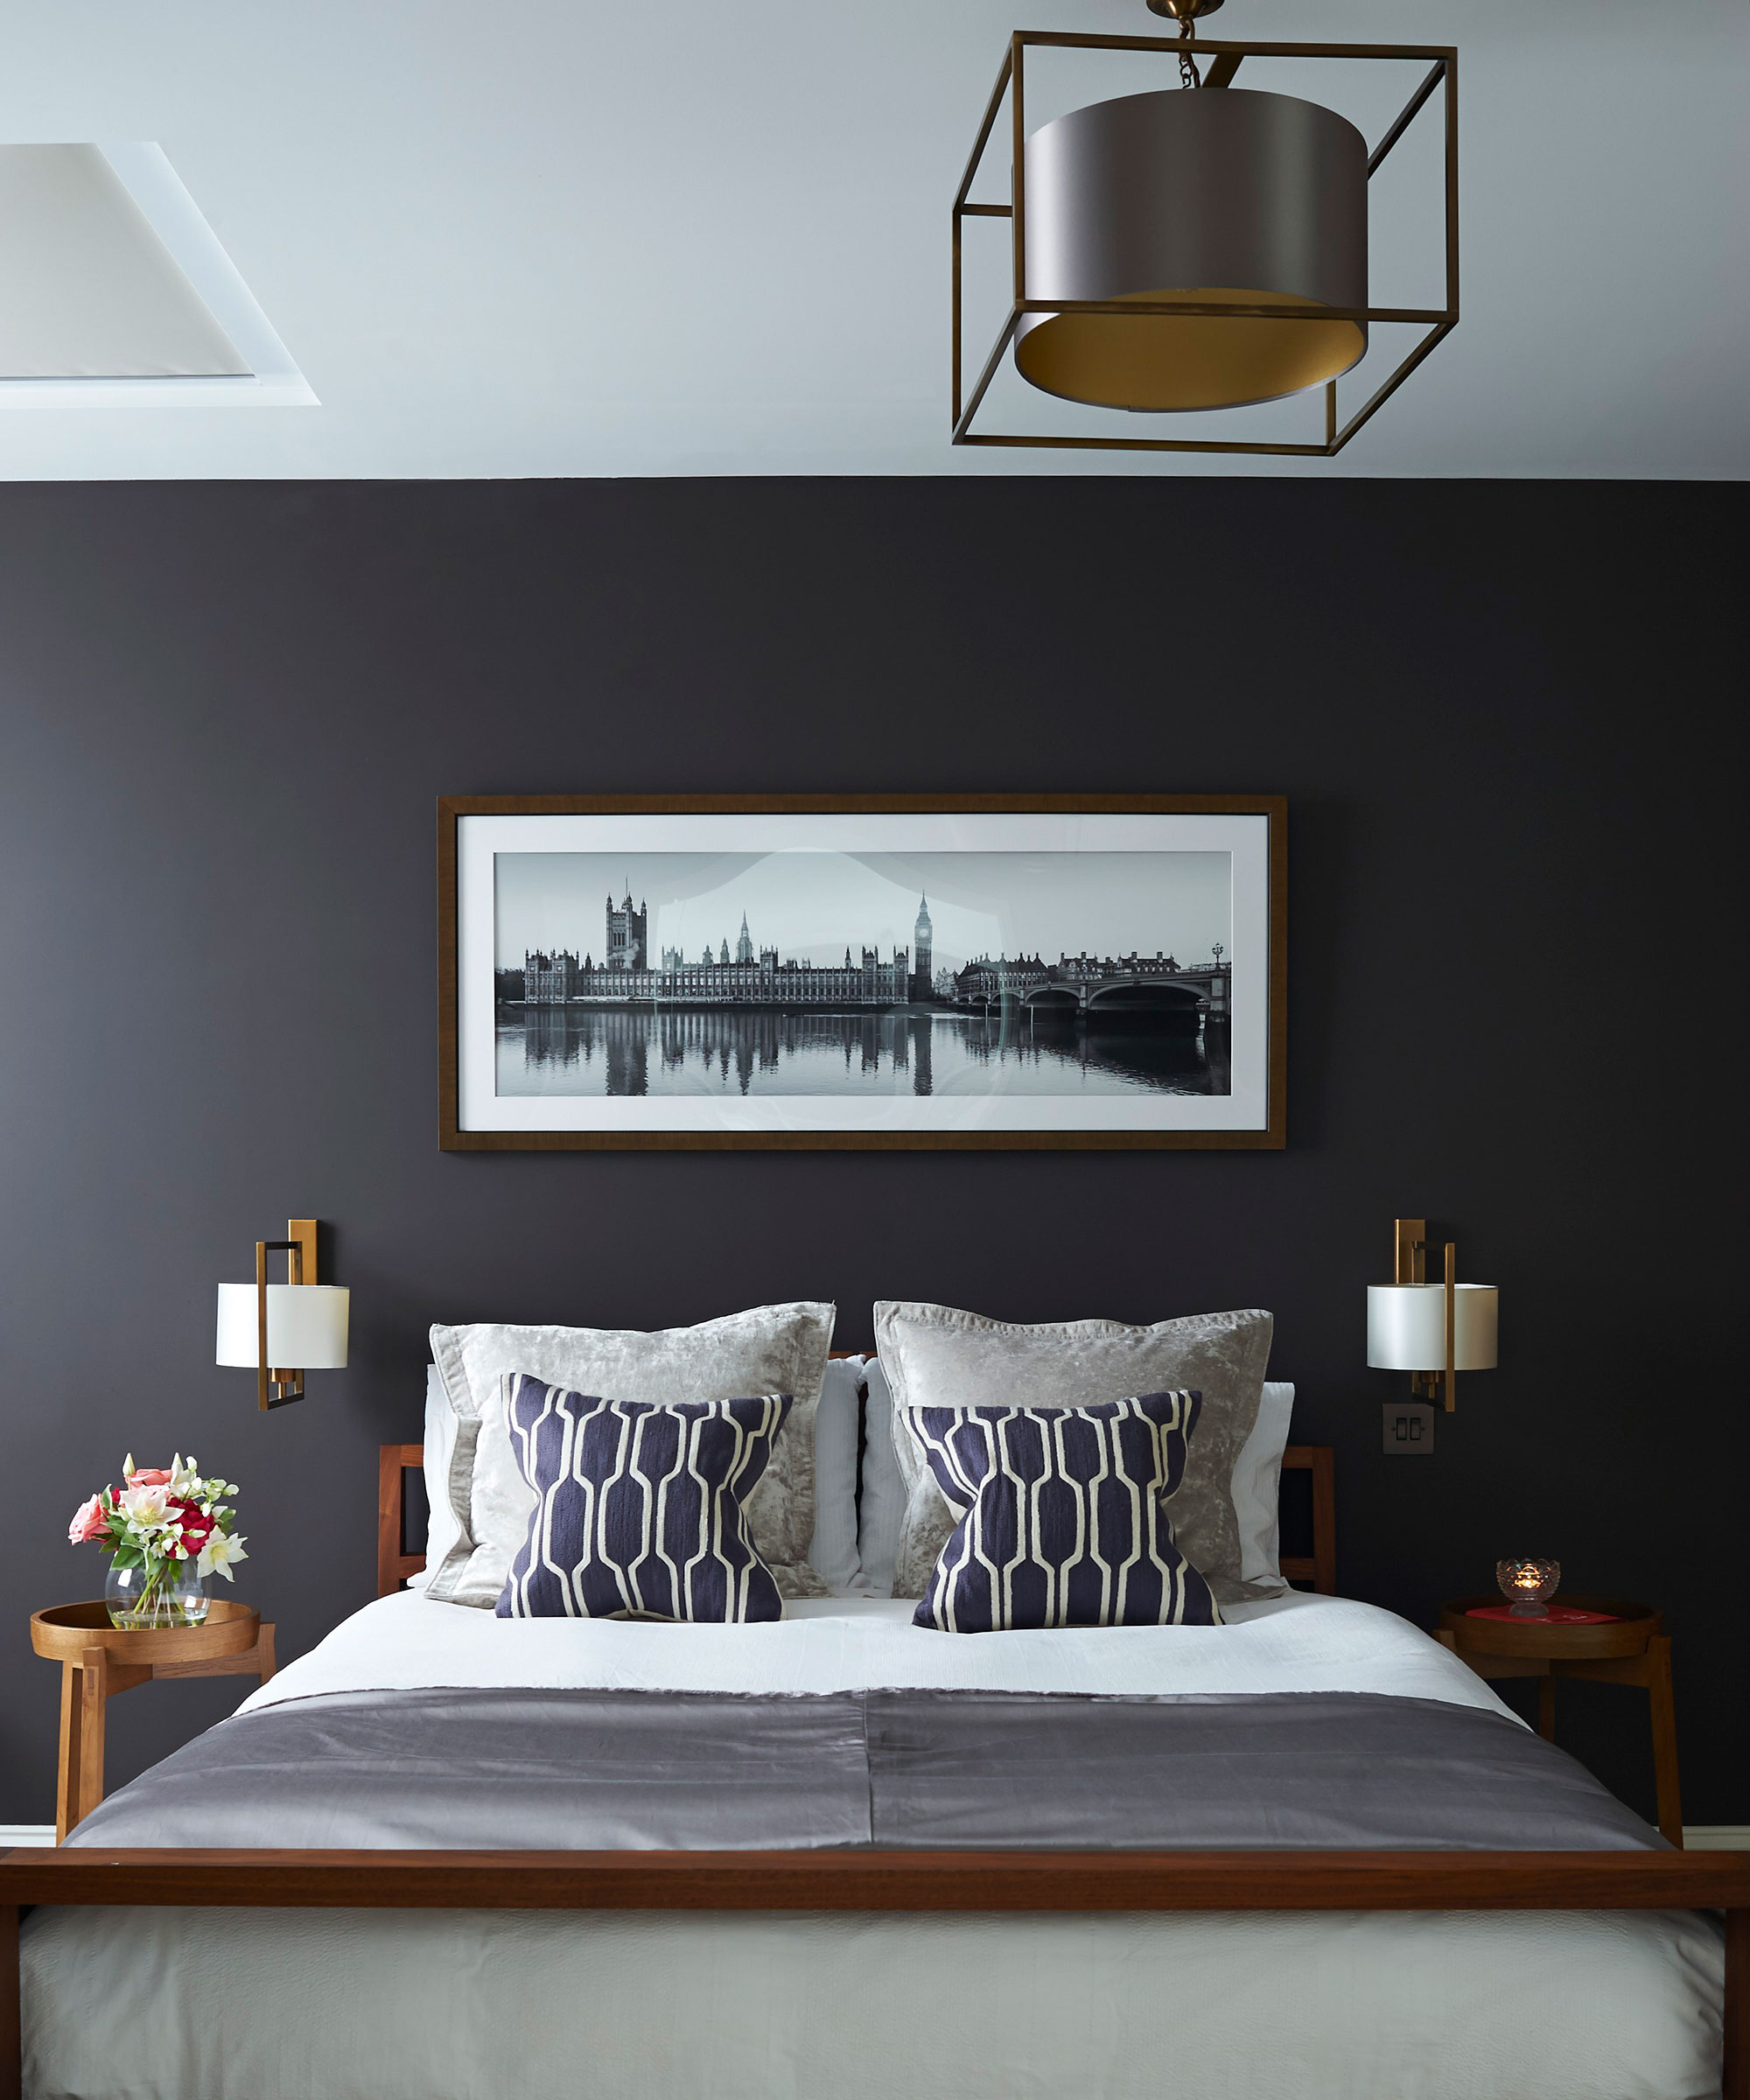 An example of bedroom lighting ideas showing a dark gray wall behind a bed with white and gray bedding and white wall lighting